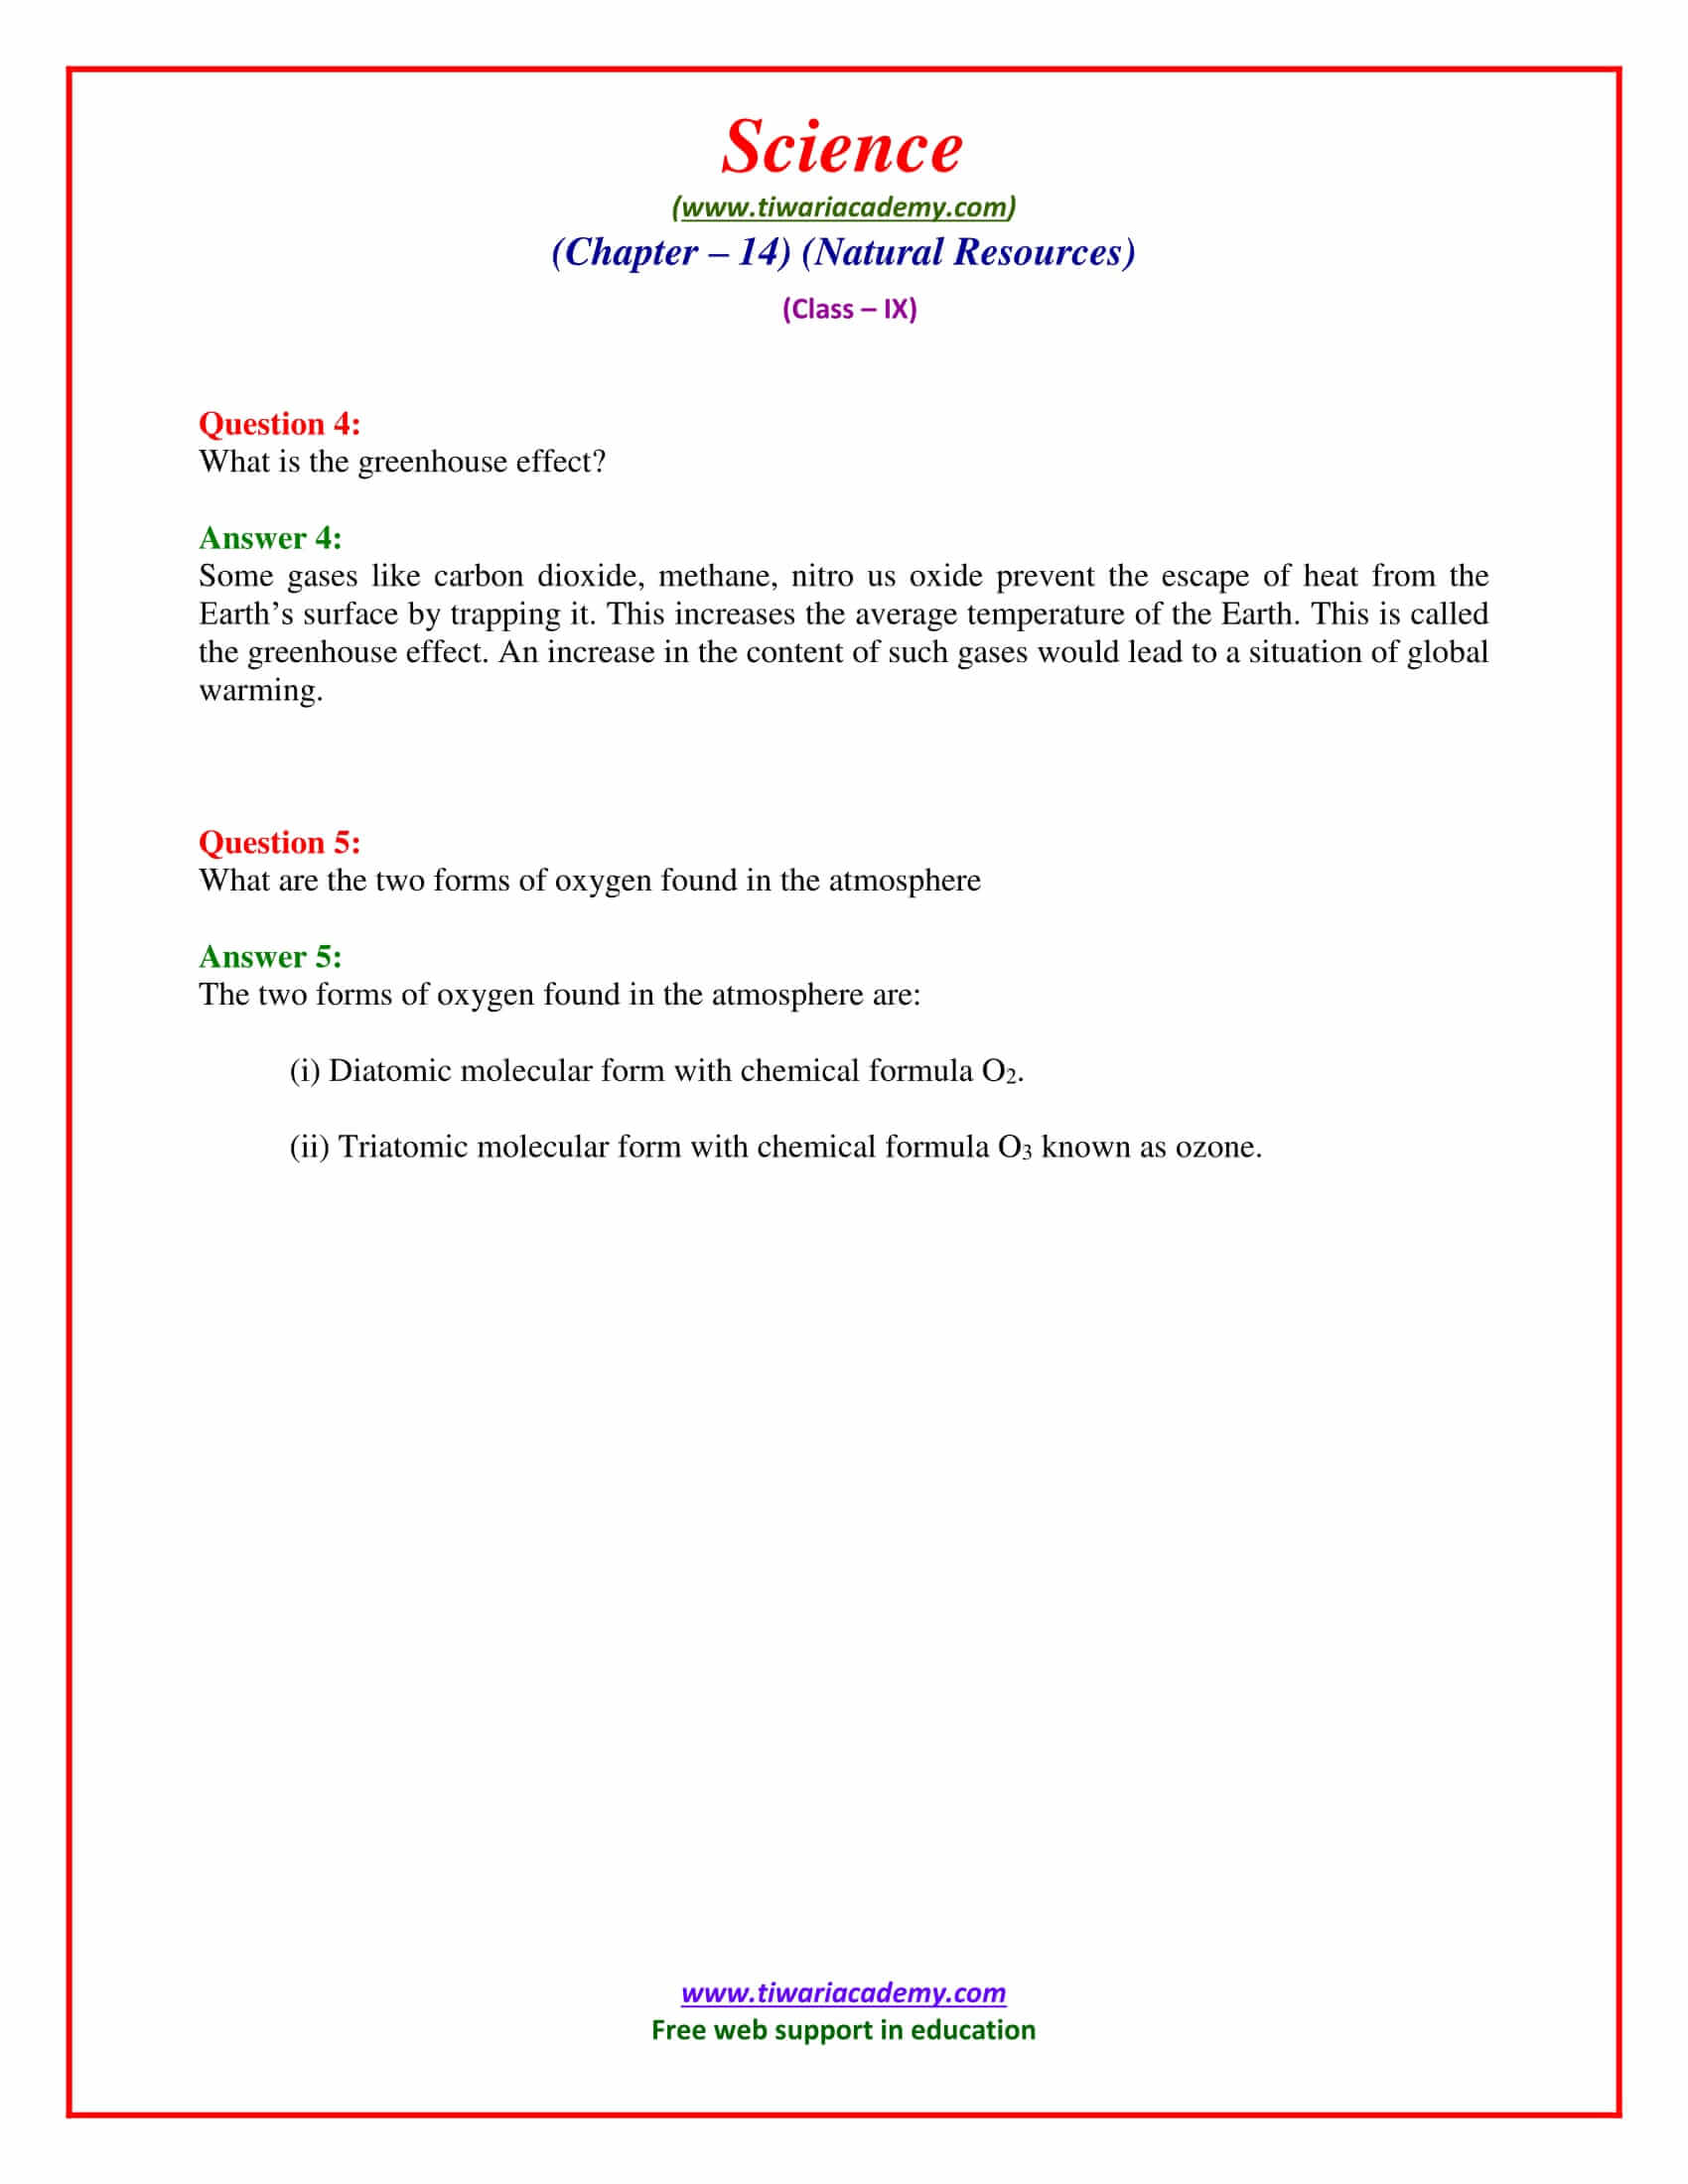 NCERT Solutions for Class 9 Science Chapter 14 Natural Resources Intext Questions Page 201 in pdf